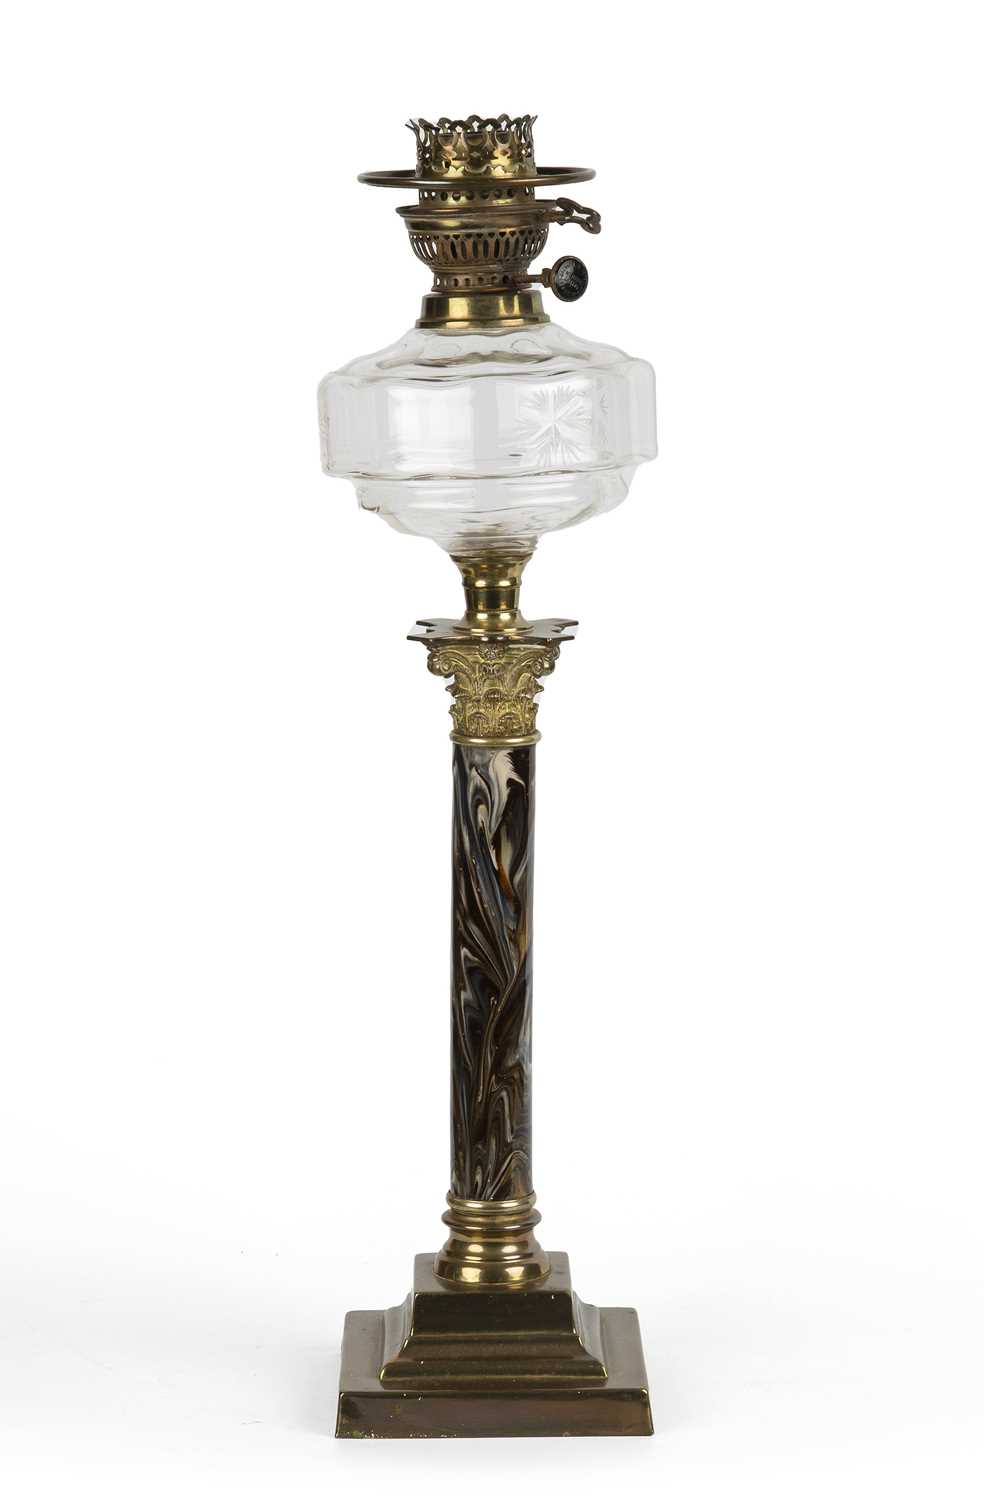 A late 19th / early 20th century German oil lamp with a cut glass well, a marble enamelled